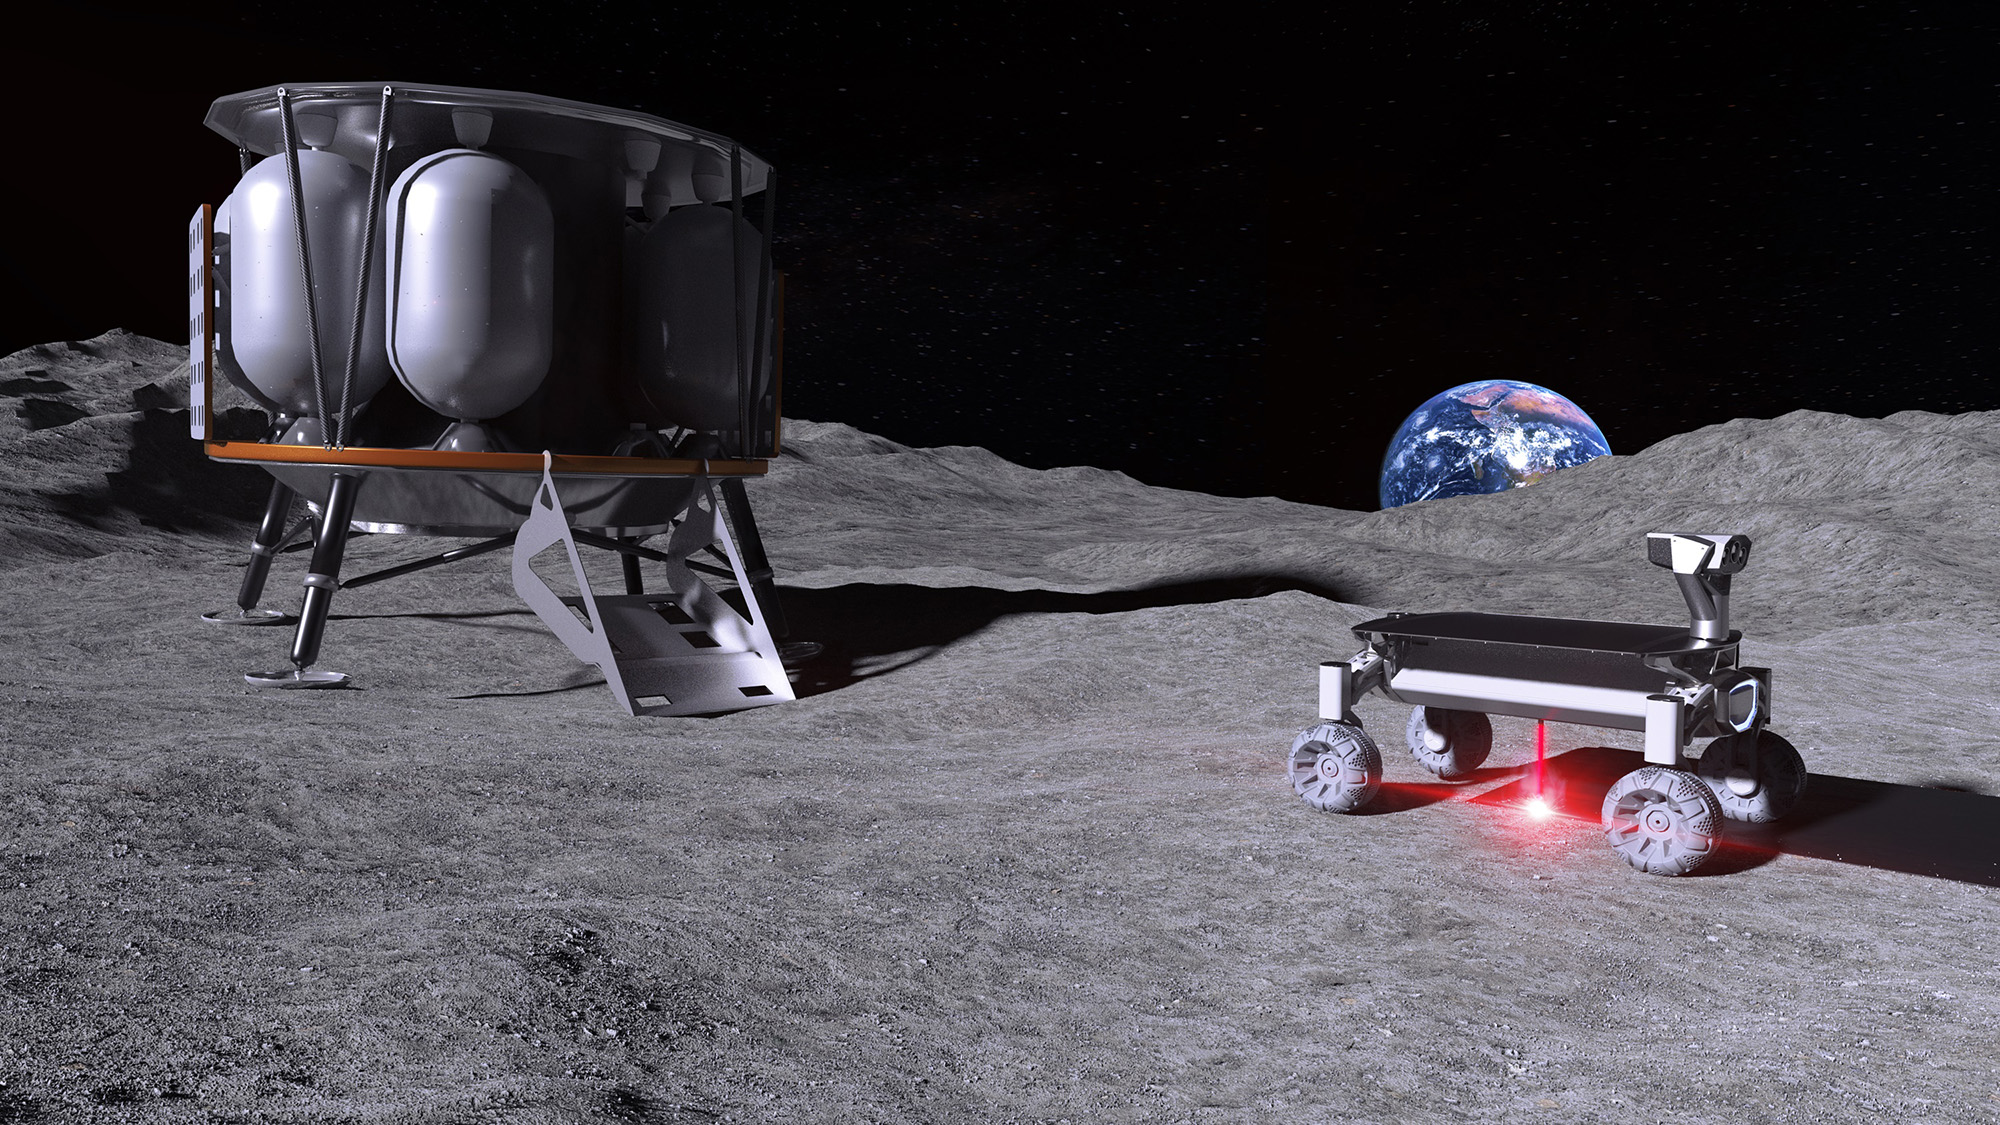 Scientists to Use Moondust, 3D Printers to Construct Lunar Settlements